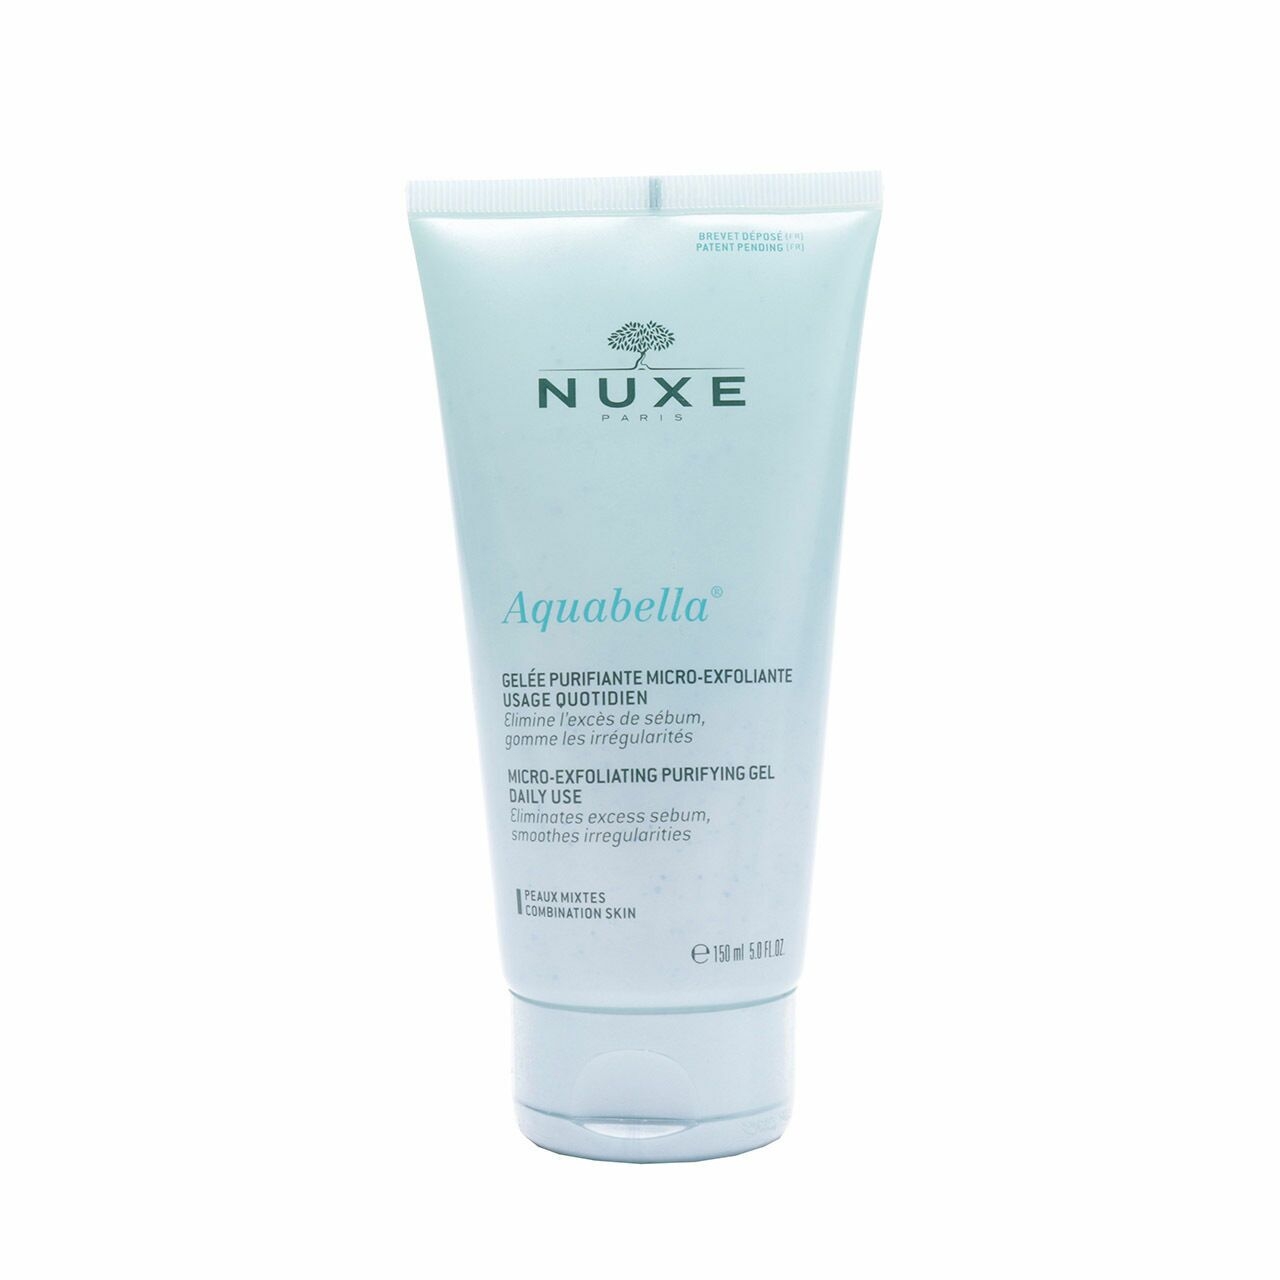 NUXE Aquabelle Micro-Exfoliating Purifying Gel Skin Care